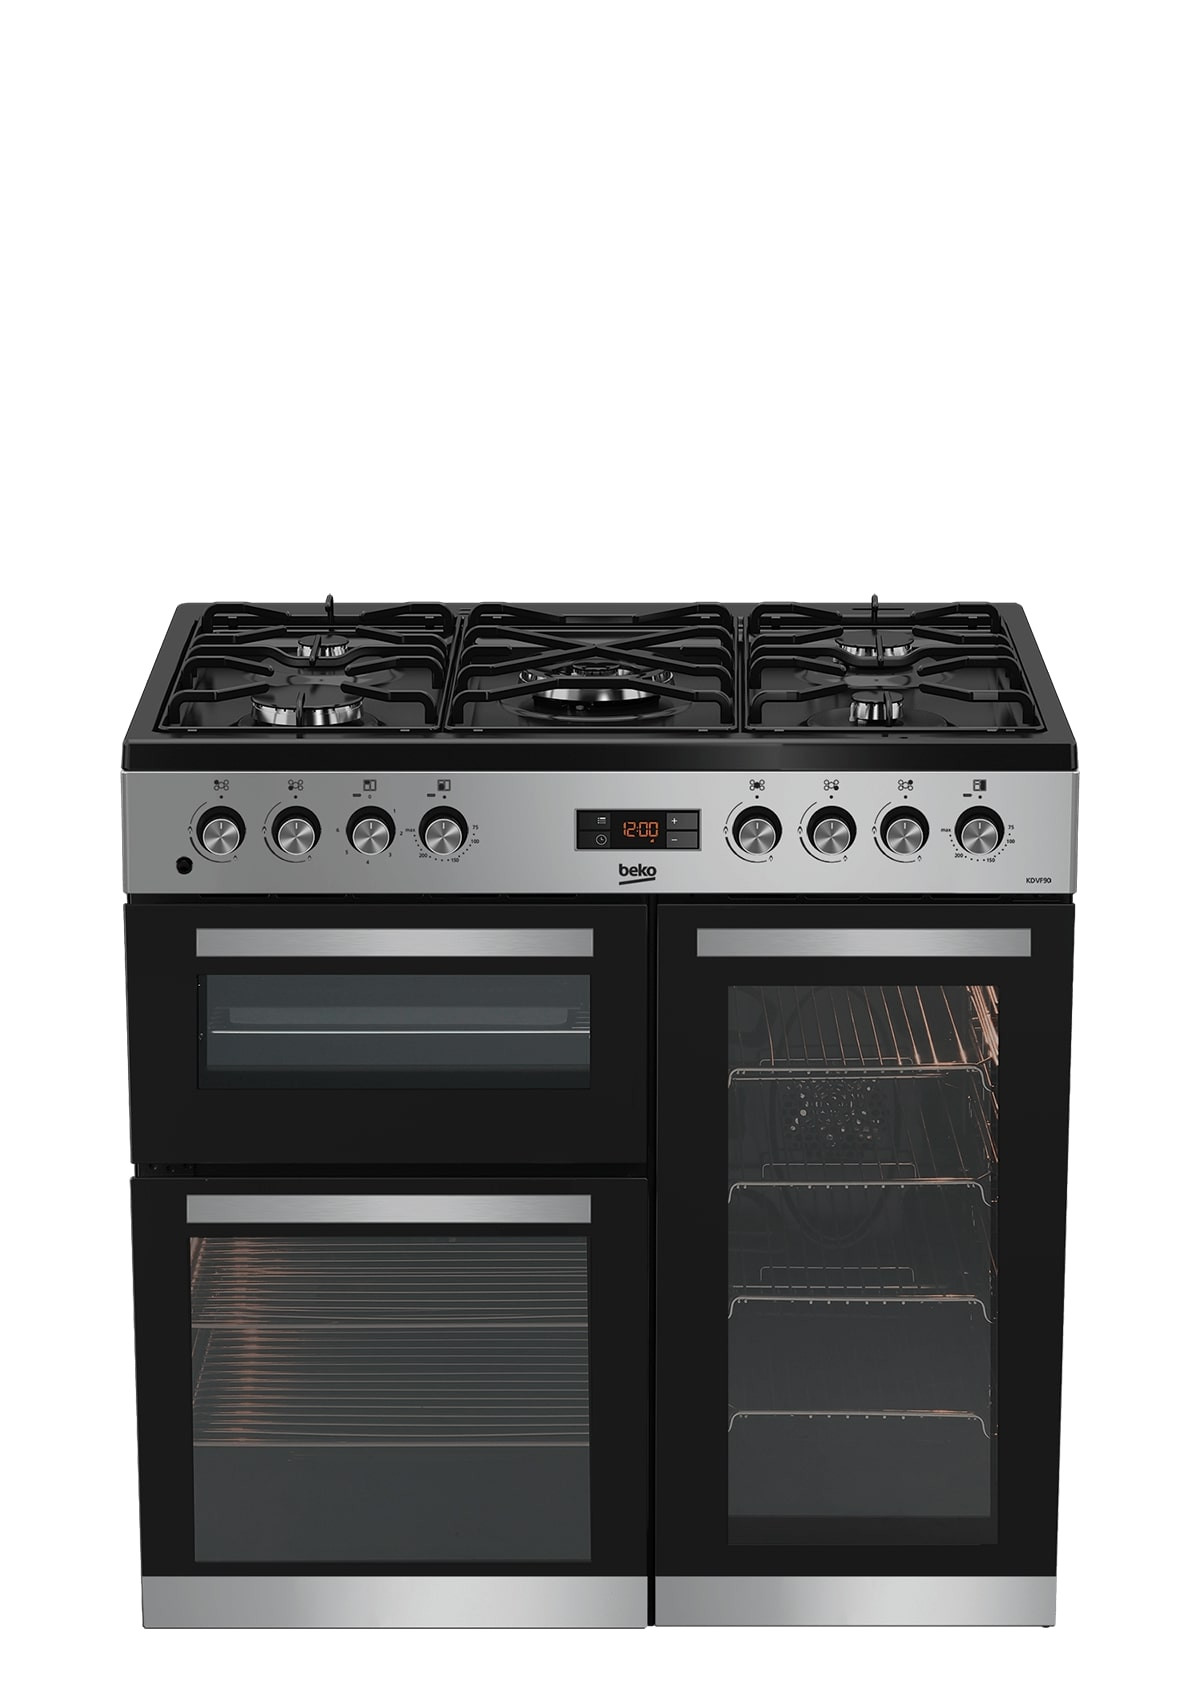 BEKO 5 GAS (1 WOK) PROFESSIONAL RANGE COOKER WITH TRIPLE OVEN 90*60 STAINLESS STEEL INOX TOP KDVF90X